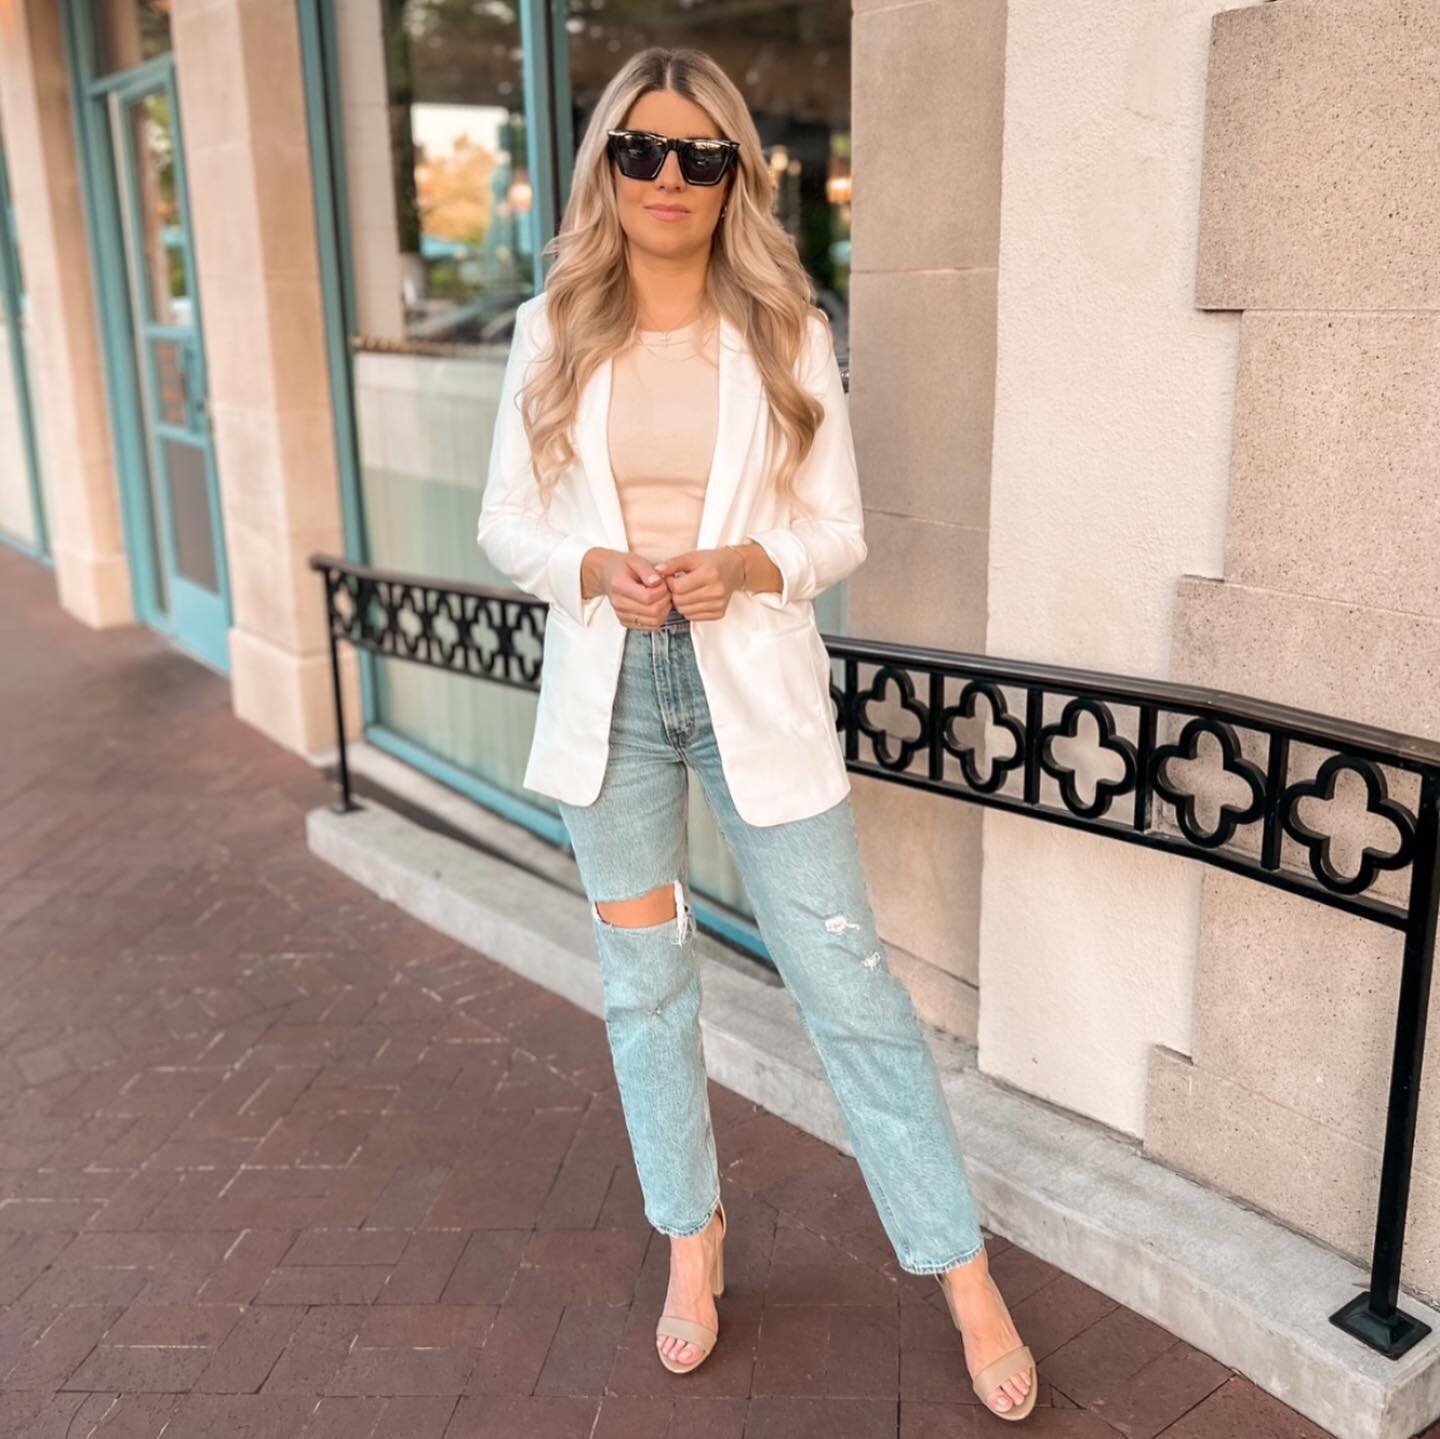 A simple blazer is my favorite way to dress up any look 🤍 

Love this white one from @kandm_boutique - especially for summertime! #capsulewardrobe #timelessstyle #blazeroutfit #styleinspo #dallasblogger